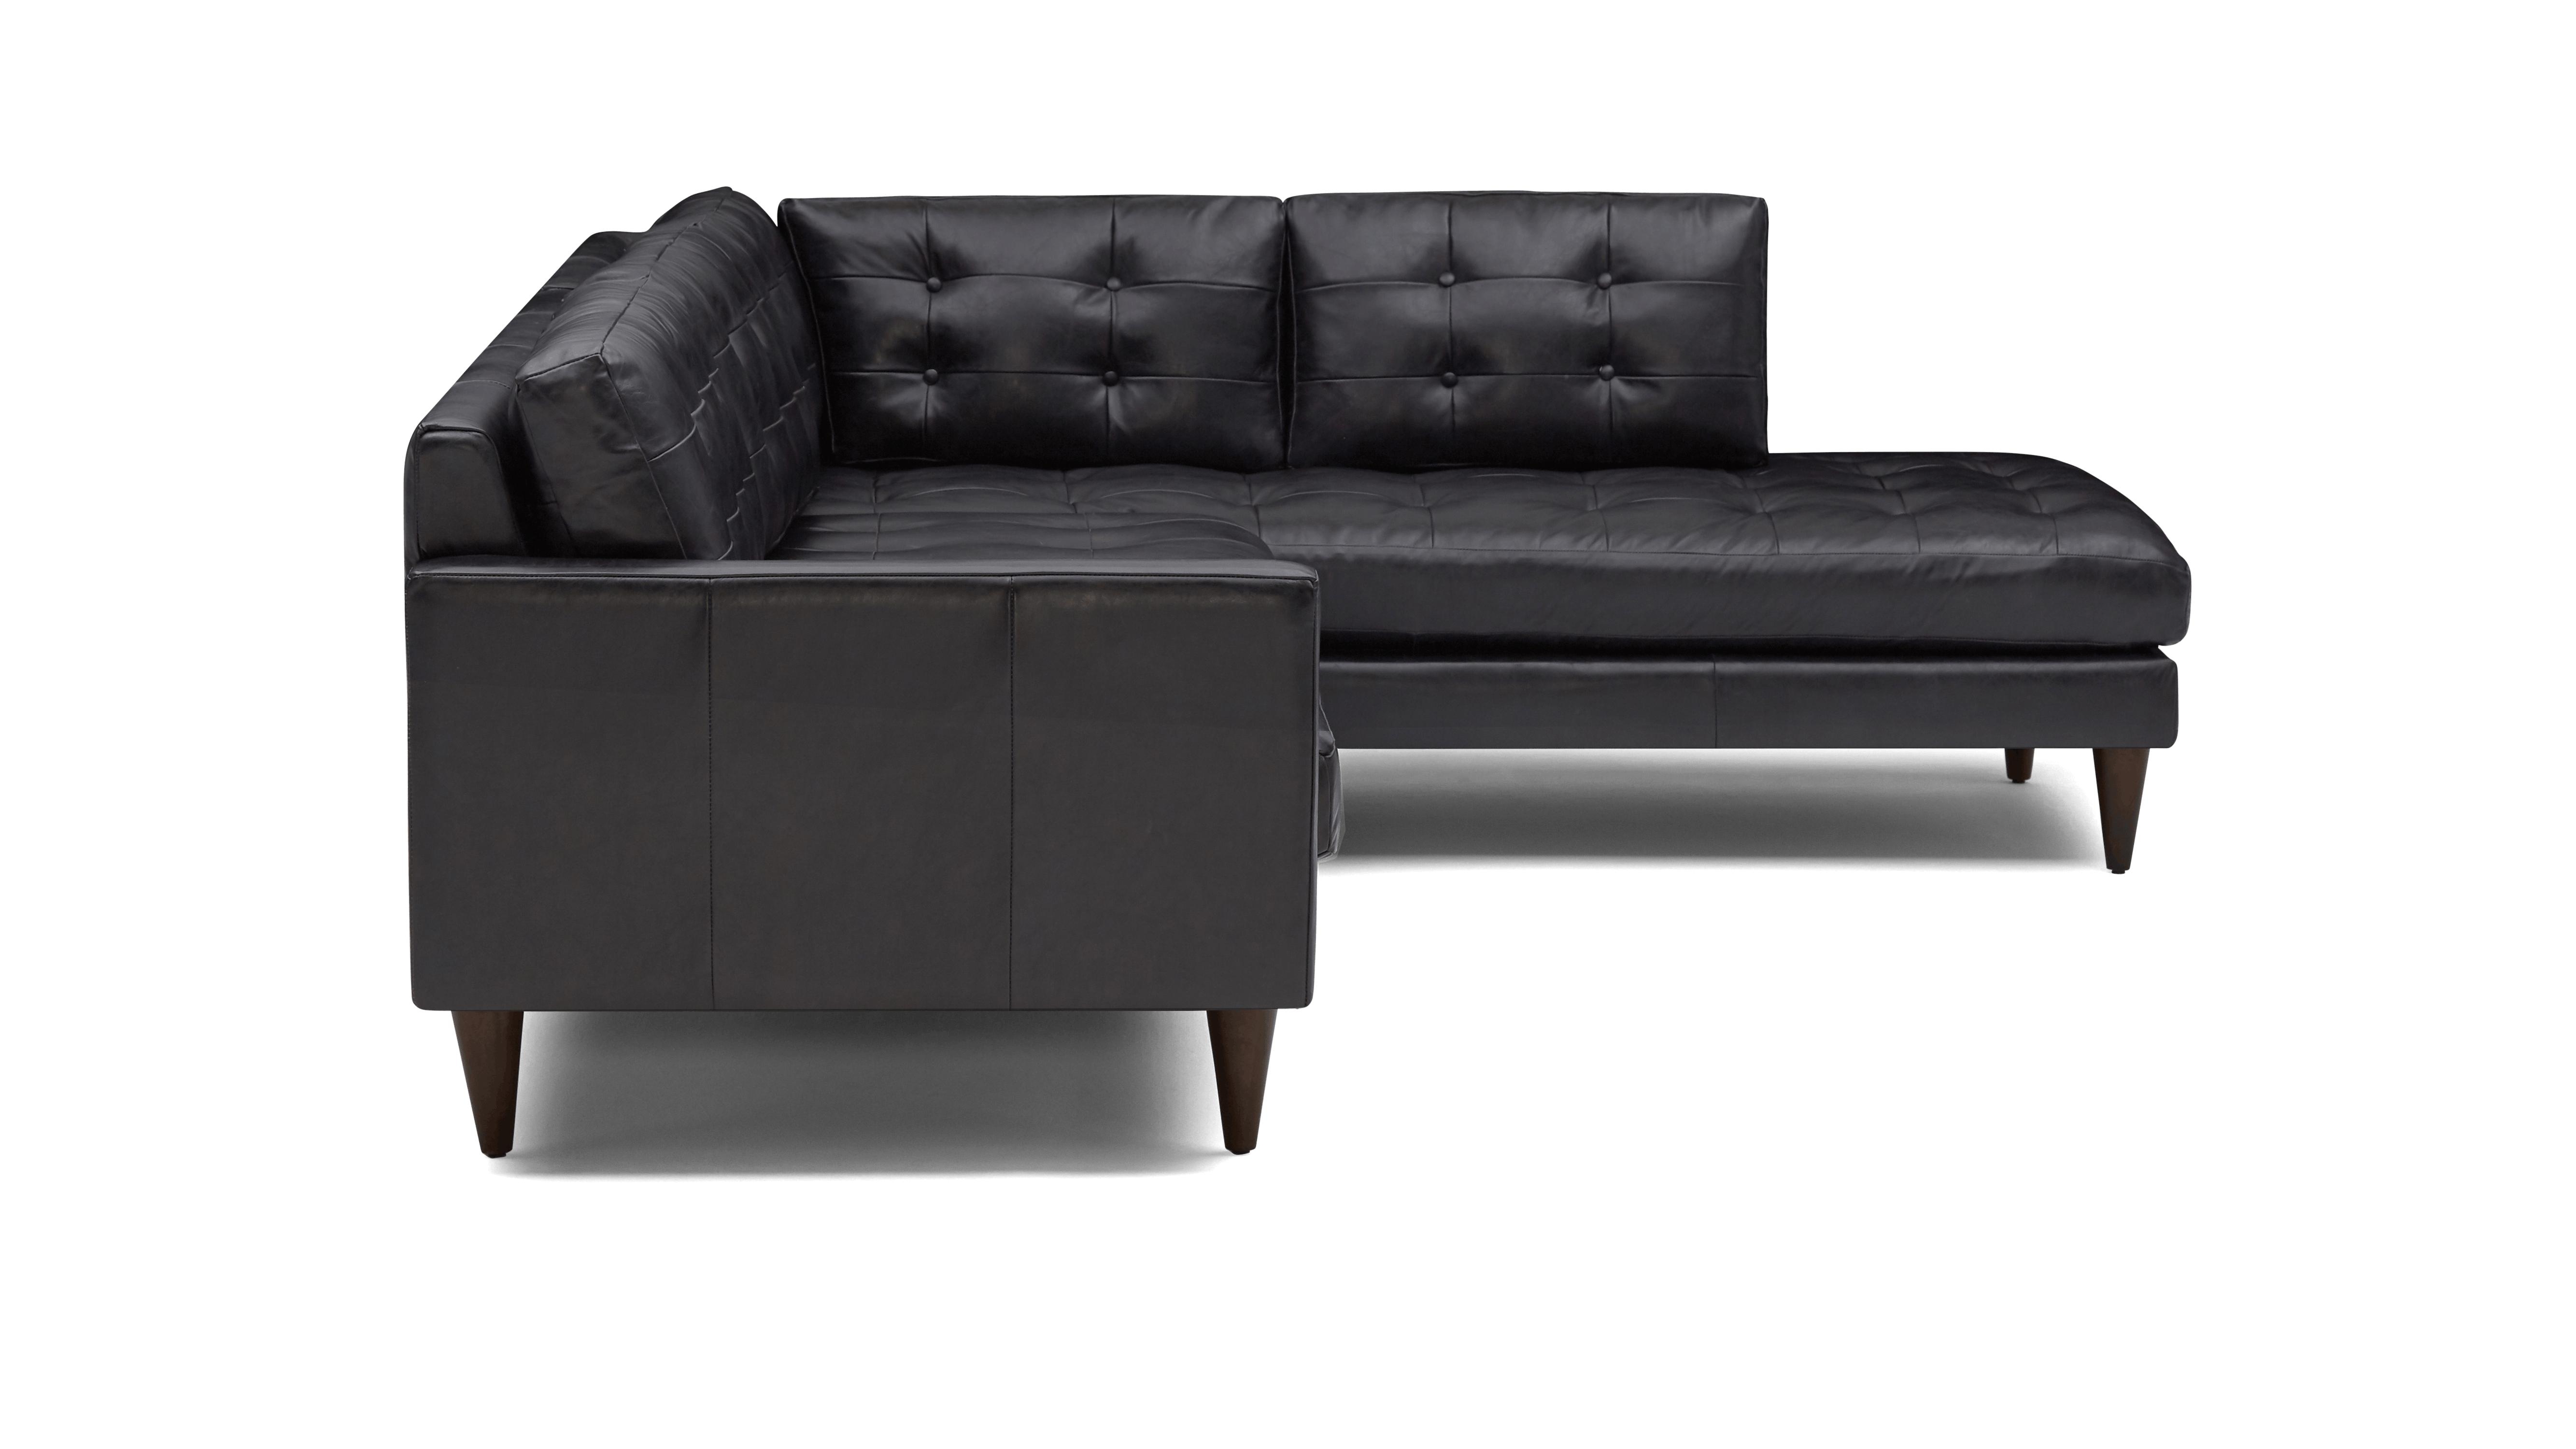 Black Eliot Mid Century Modern Leather Sectional with Bumper - Santiago Steel - Mocha - Right  - Image 2